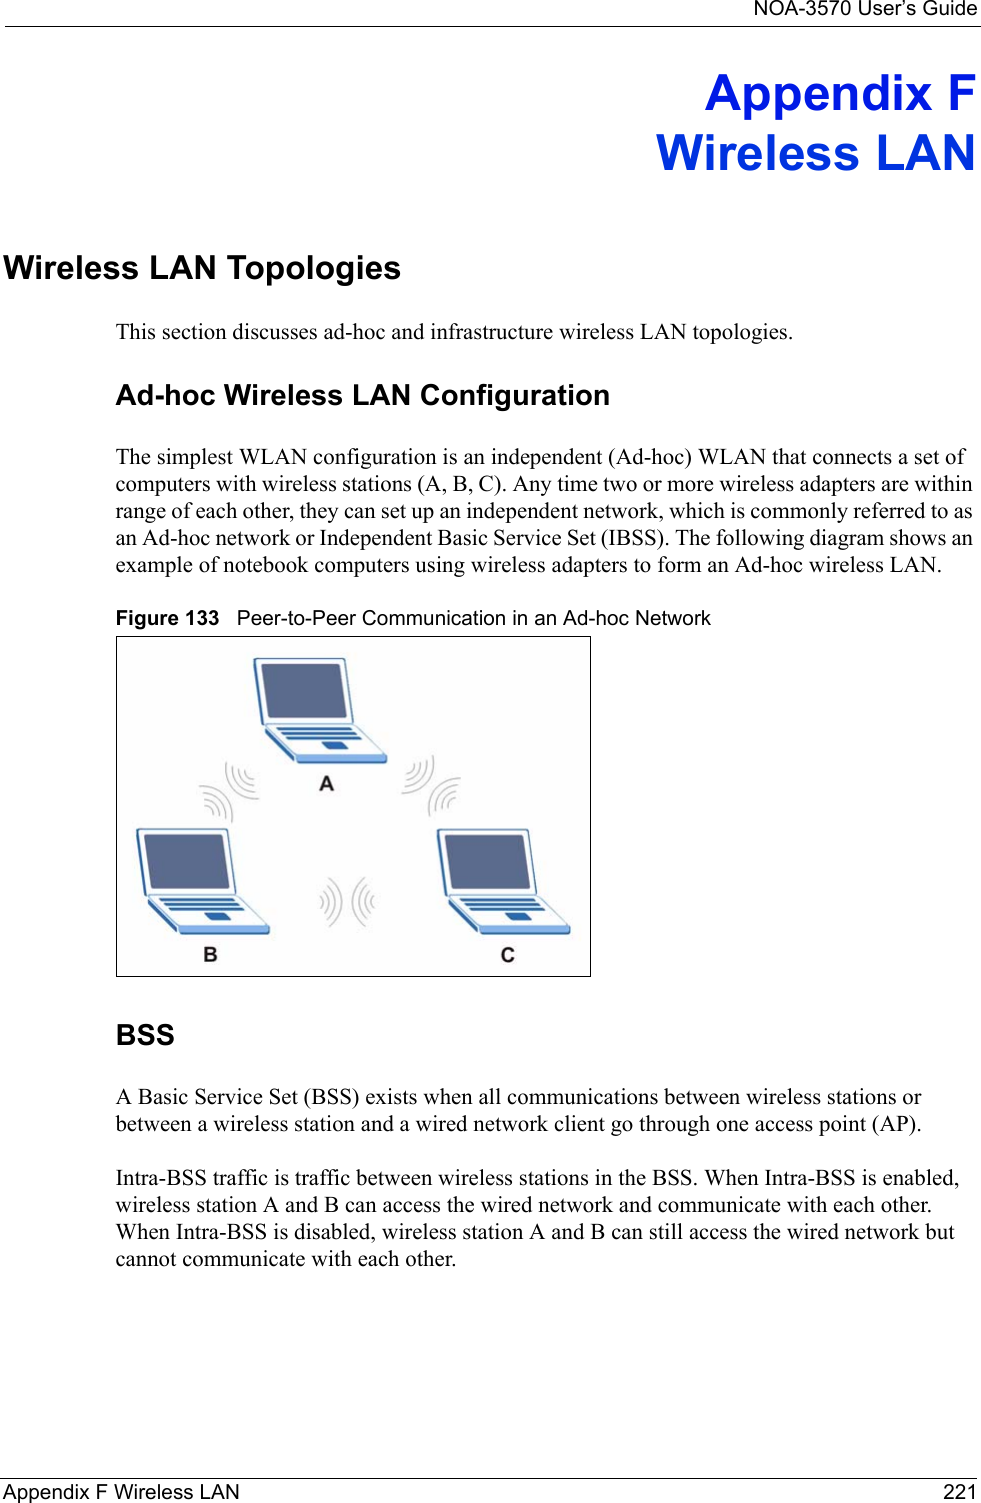 NOA-3570 User’s GuideAppendix F Wireless LAN 221Appendix FWireless LANWireless LAN TopologiesThis section discusses ad-hoc and infrastructure wireless LAN topologies.Ad-hoc Wireless LAN ConfigurationThe simplest WLAN configuration is an independent (Ad-hoc) WLAN that connects a set of computers with wireless stations (A, B, C). Any time two or more wireless adapters are within range of each other, they can set up an independent network, which is commonly referred to as an Ad-hoc network or Independent Basic Service Set (IBSS). The following diagram shows an example of notebook computers using wireless adapters to form an Ad-hoc wireless LAN. Figure 133   Peer-to-Peer Communication in an Ad-hoc NetworkBSSA Basic Service Set (BSS) exists when all communications between wireless stations or between a wireless station and a wired network client go through one access point (AP). Intra-BSS traffic is traffic between wireless stations in the BSS. When Intra-BSS is enabled, wireless station A and B can access the wired network and communicate with each other. When Intra-BSS is disabled, wireless station A and B can still access the wired network but cannot communicate with each other.